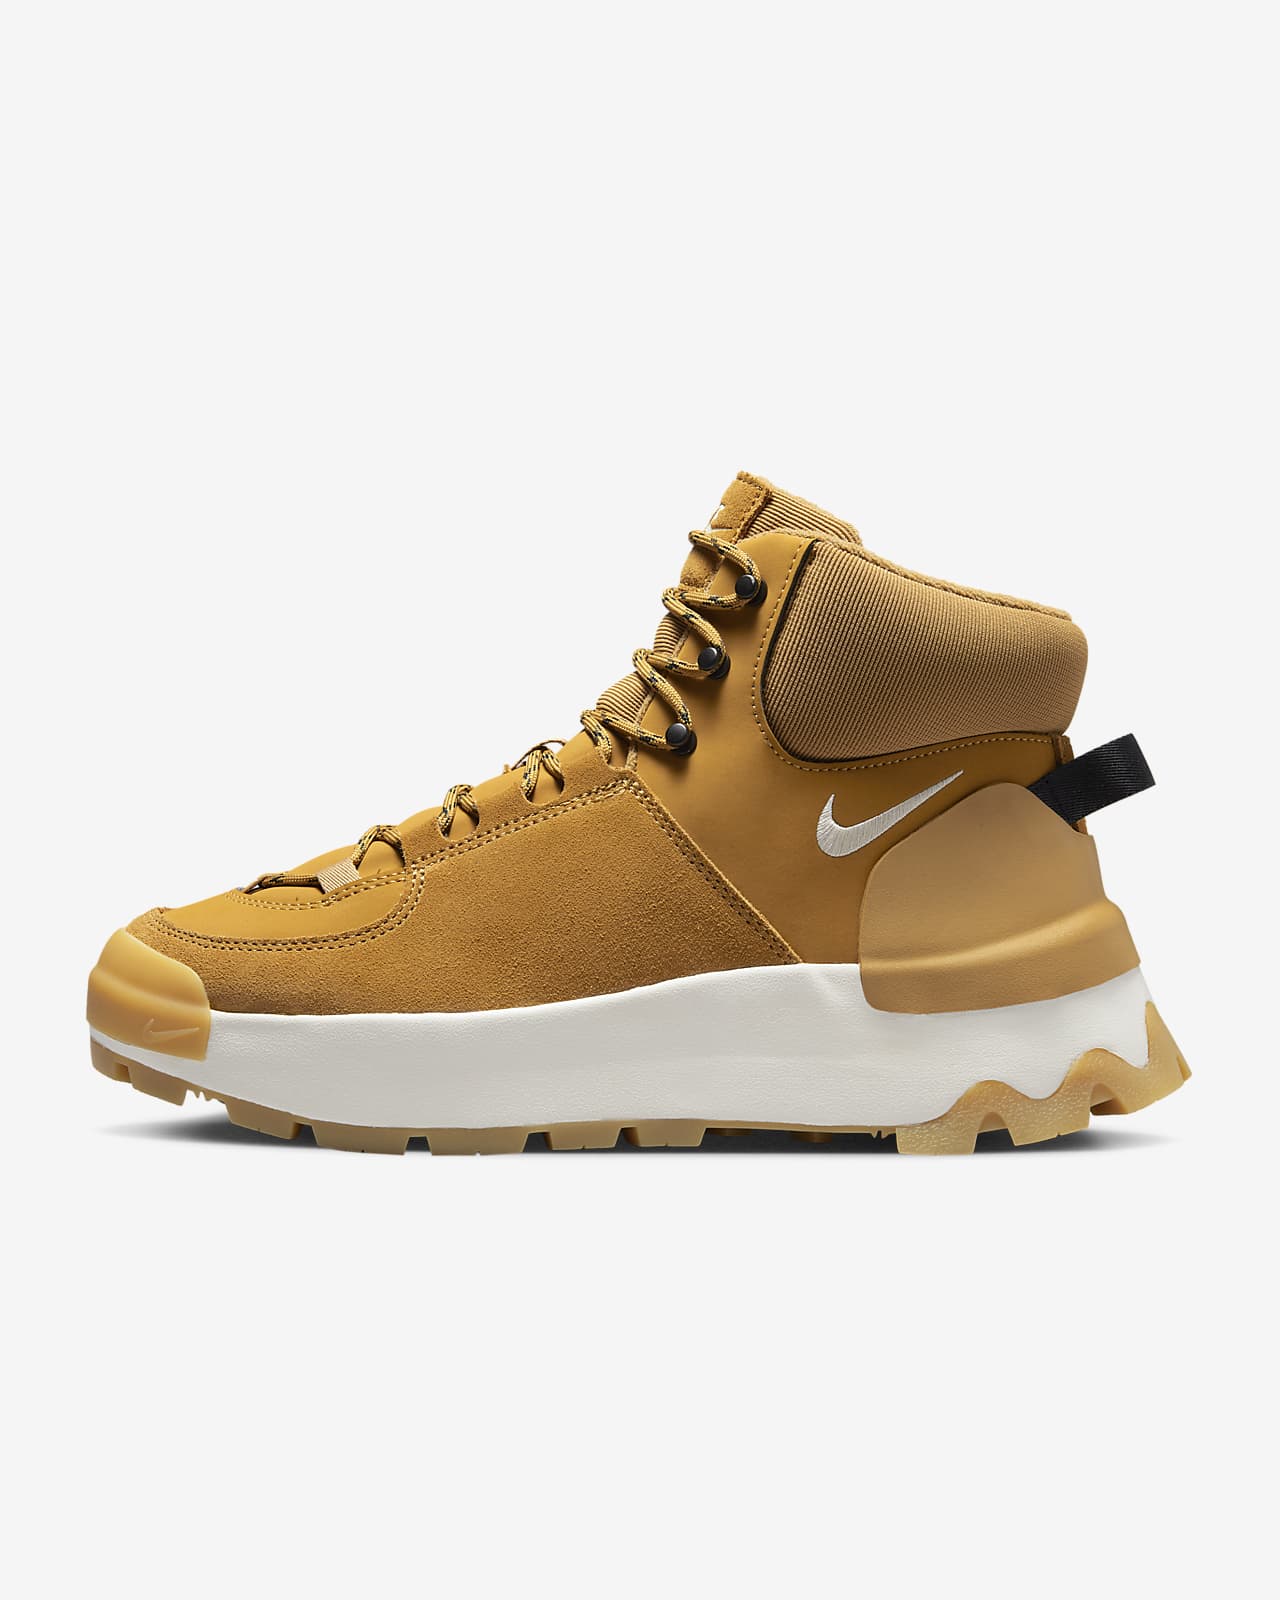 Nike Astoria Boot - New Leather Versions •